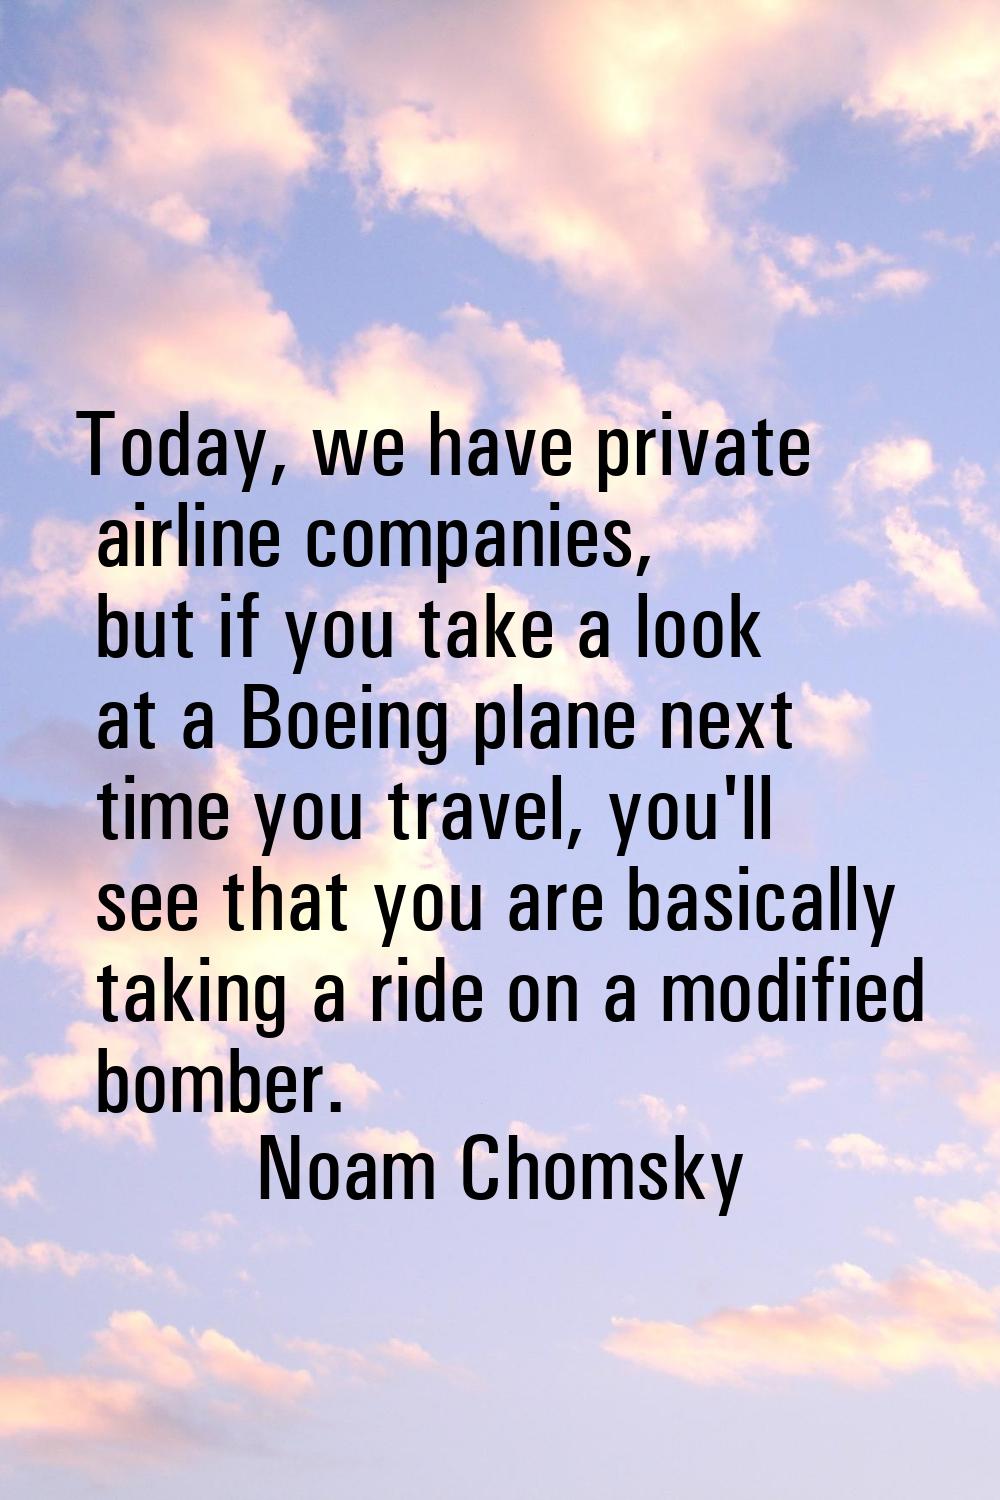 Today, we have private airline companies, but if you take a look at a Boeing plane next time you tr